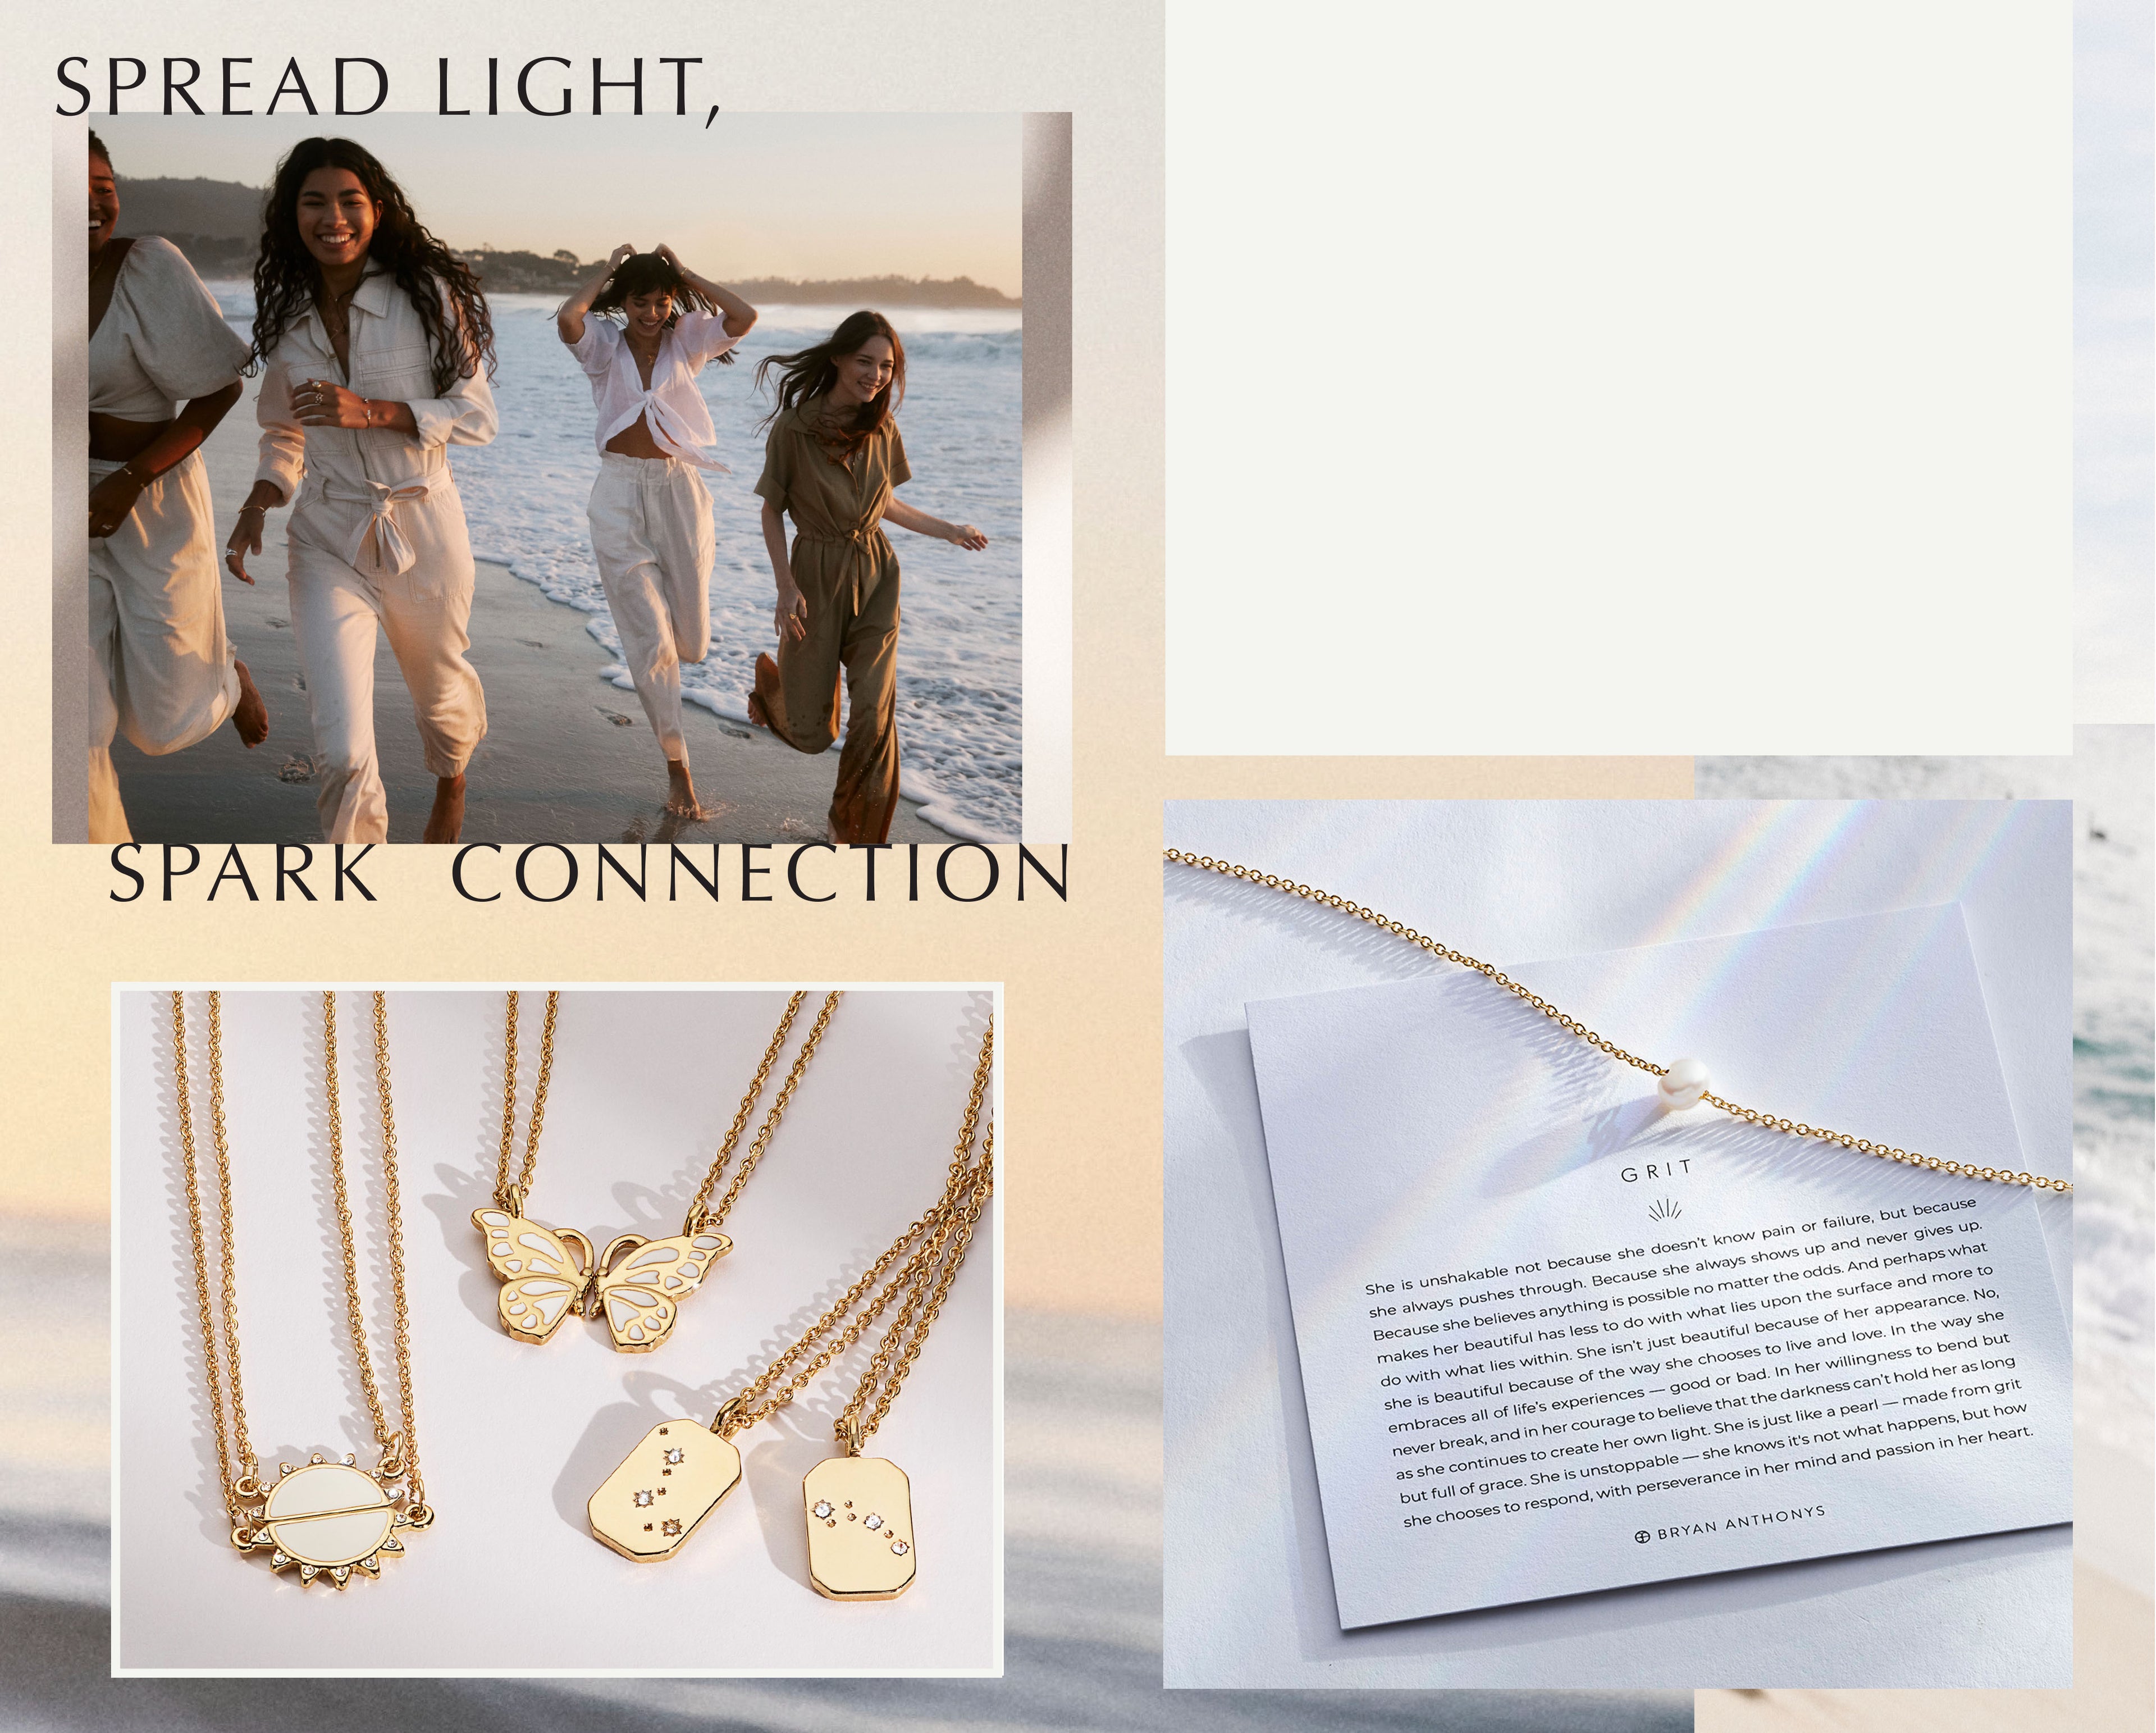 Spread Light, Spark connection text - photo of models on the beach